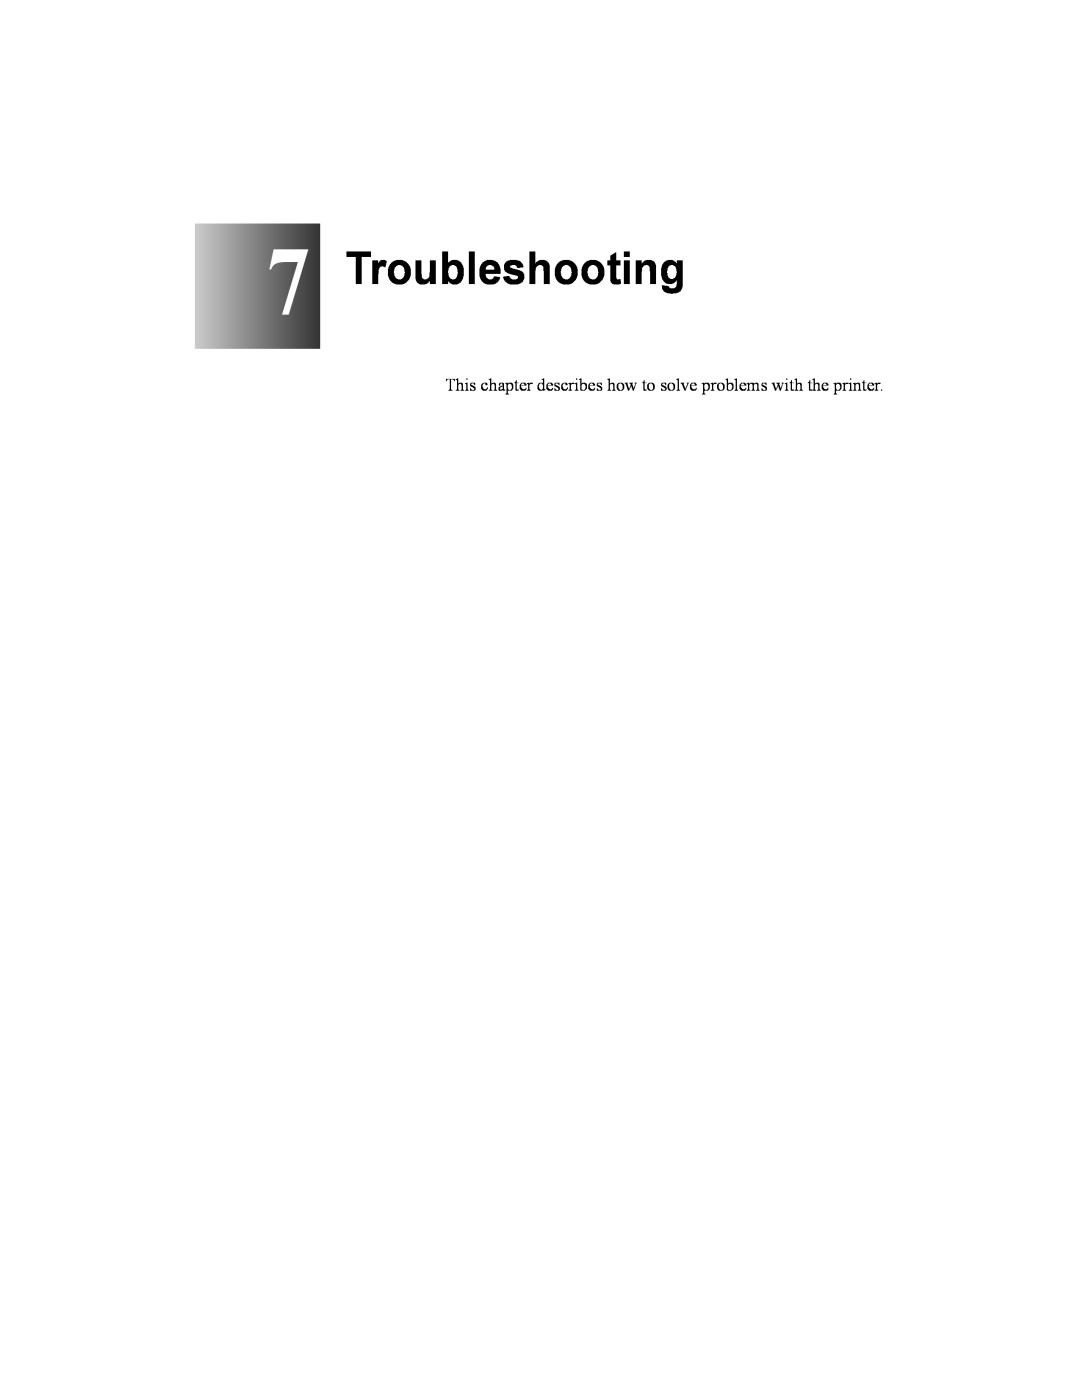 Canon W2200 manual Troubleshooting, This chapter describes how to solve problems with the printer 